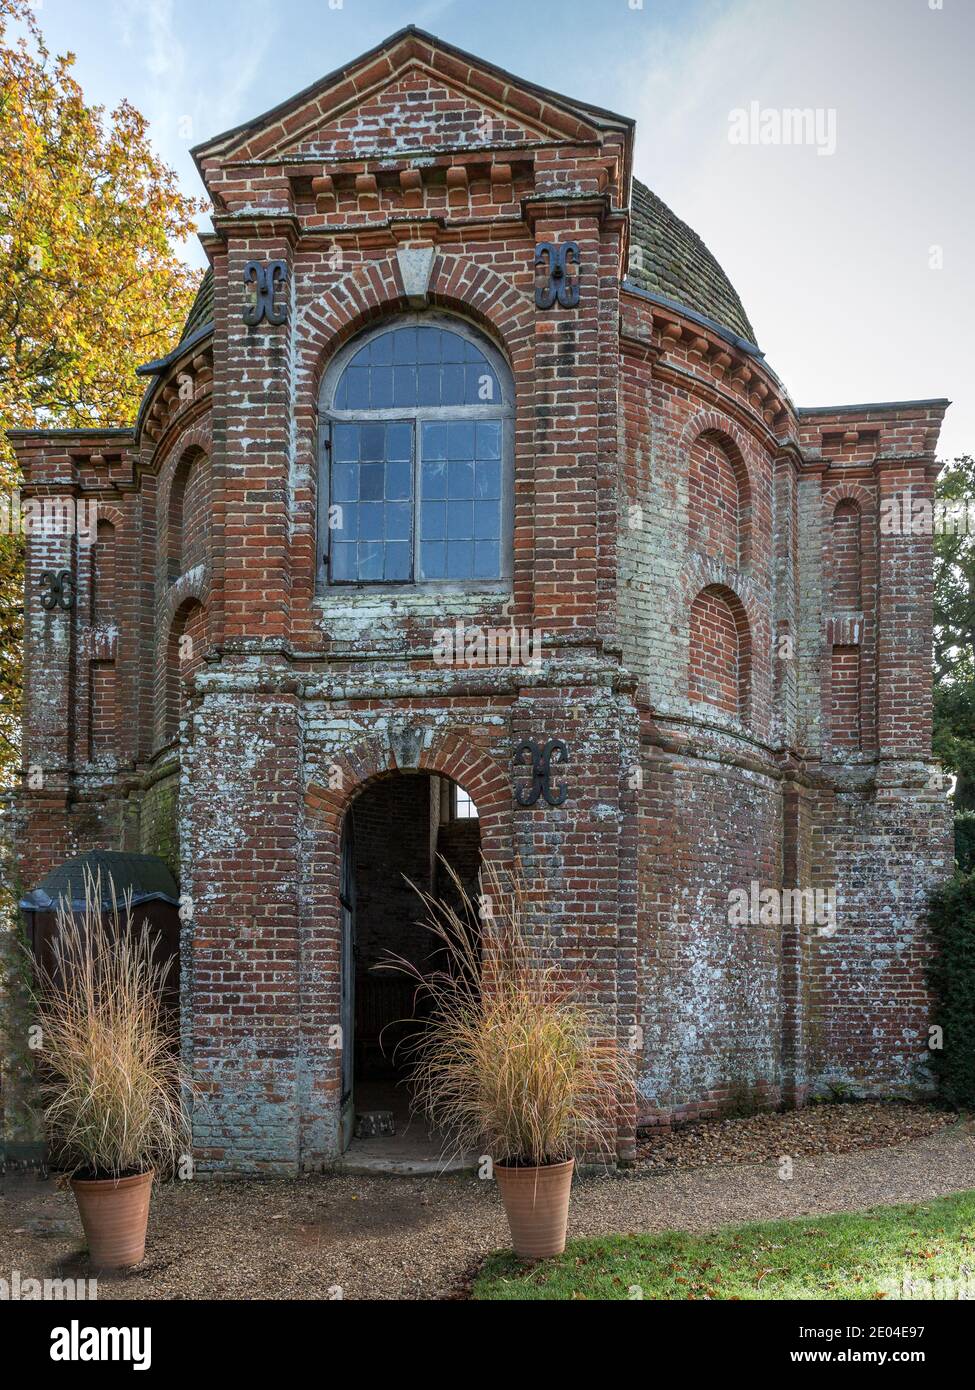 Red brick Tudor summerhouse in the garden of The Vyne, featuring one of the earliest neo-classical domes in England. Stock Photo